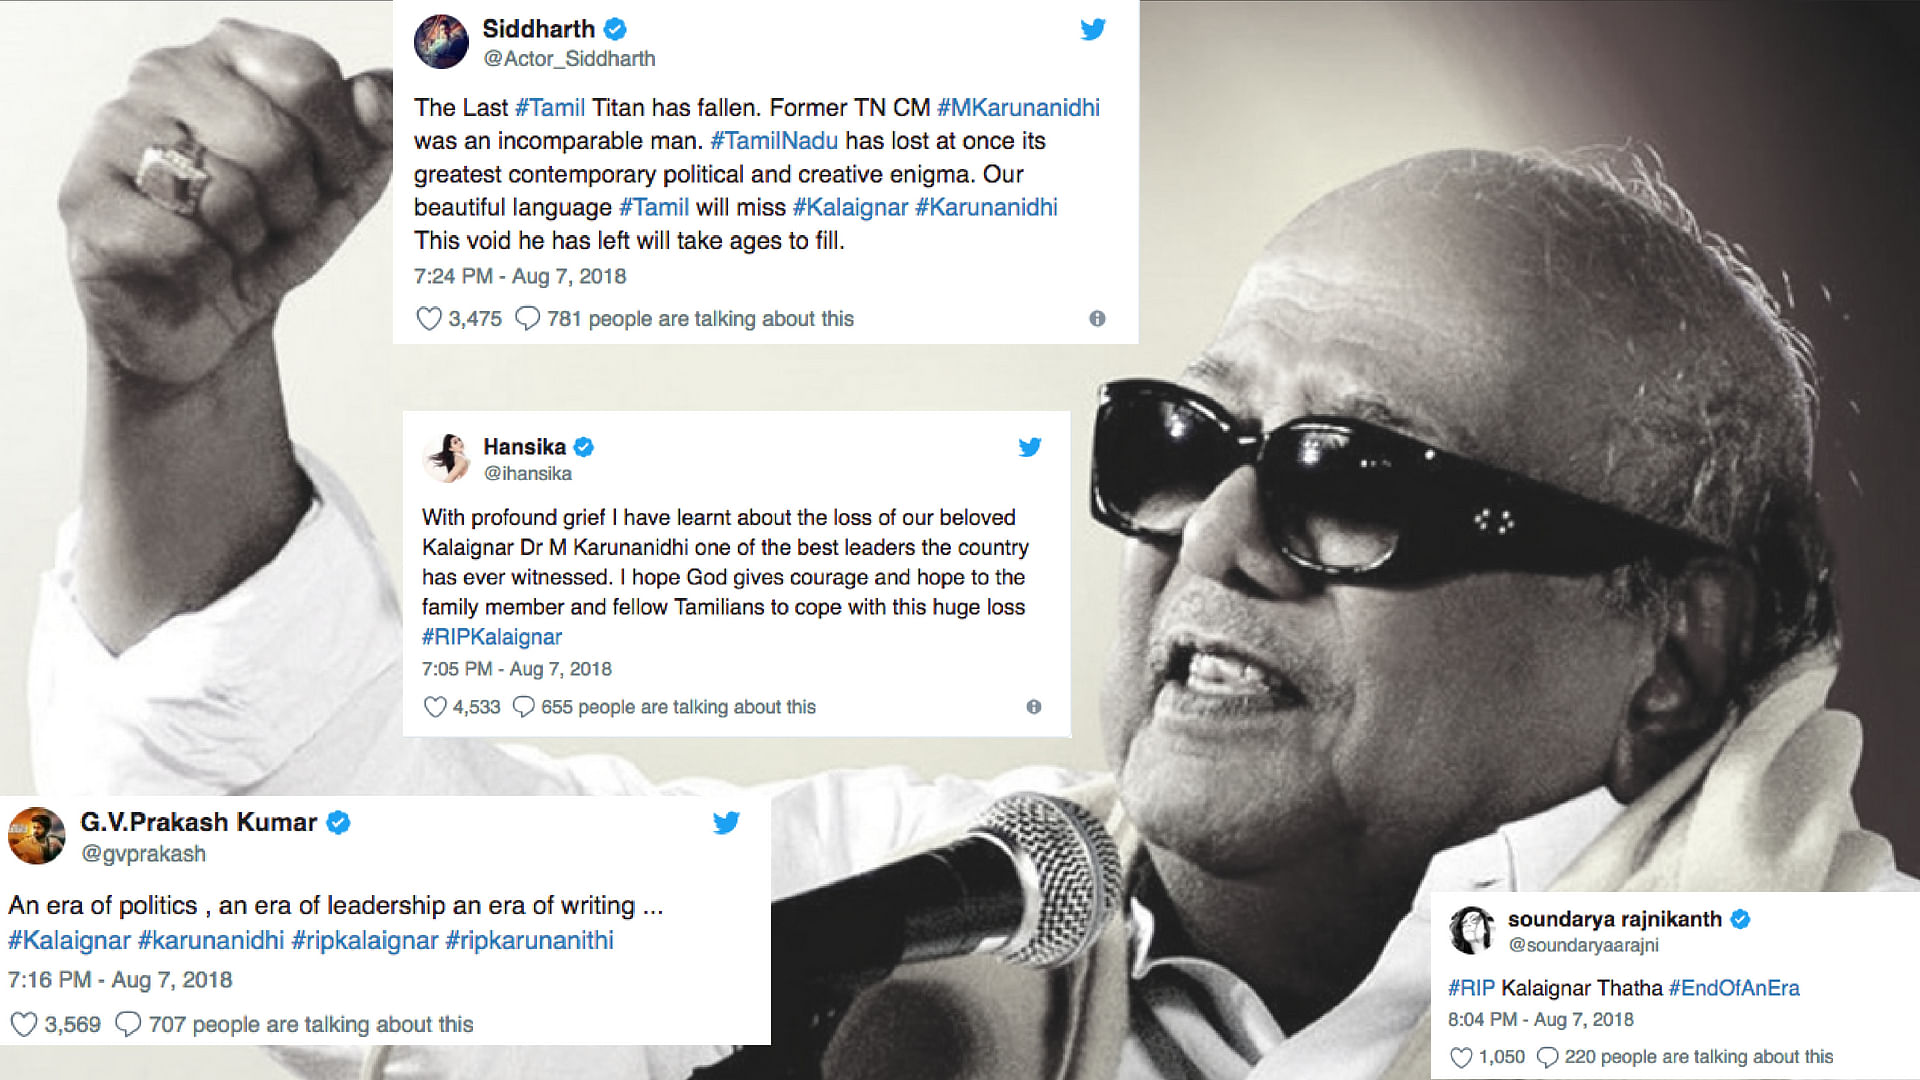 Various members of the film fraternity have tweeted their condolences as they try to reconcile with their loss.